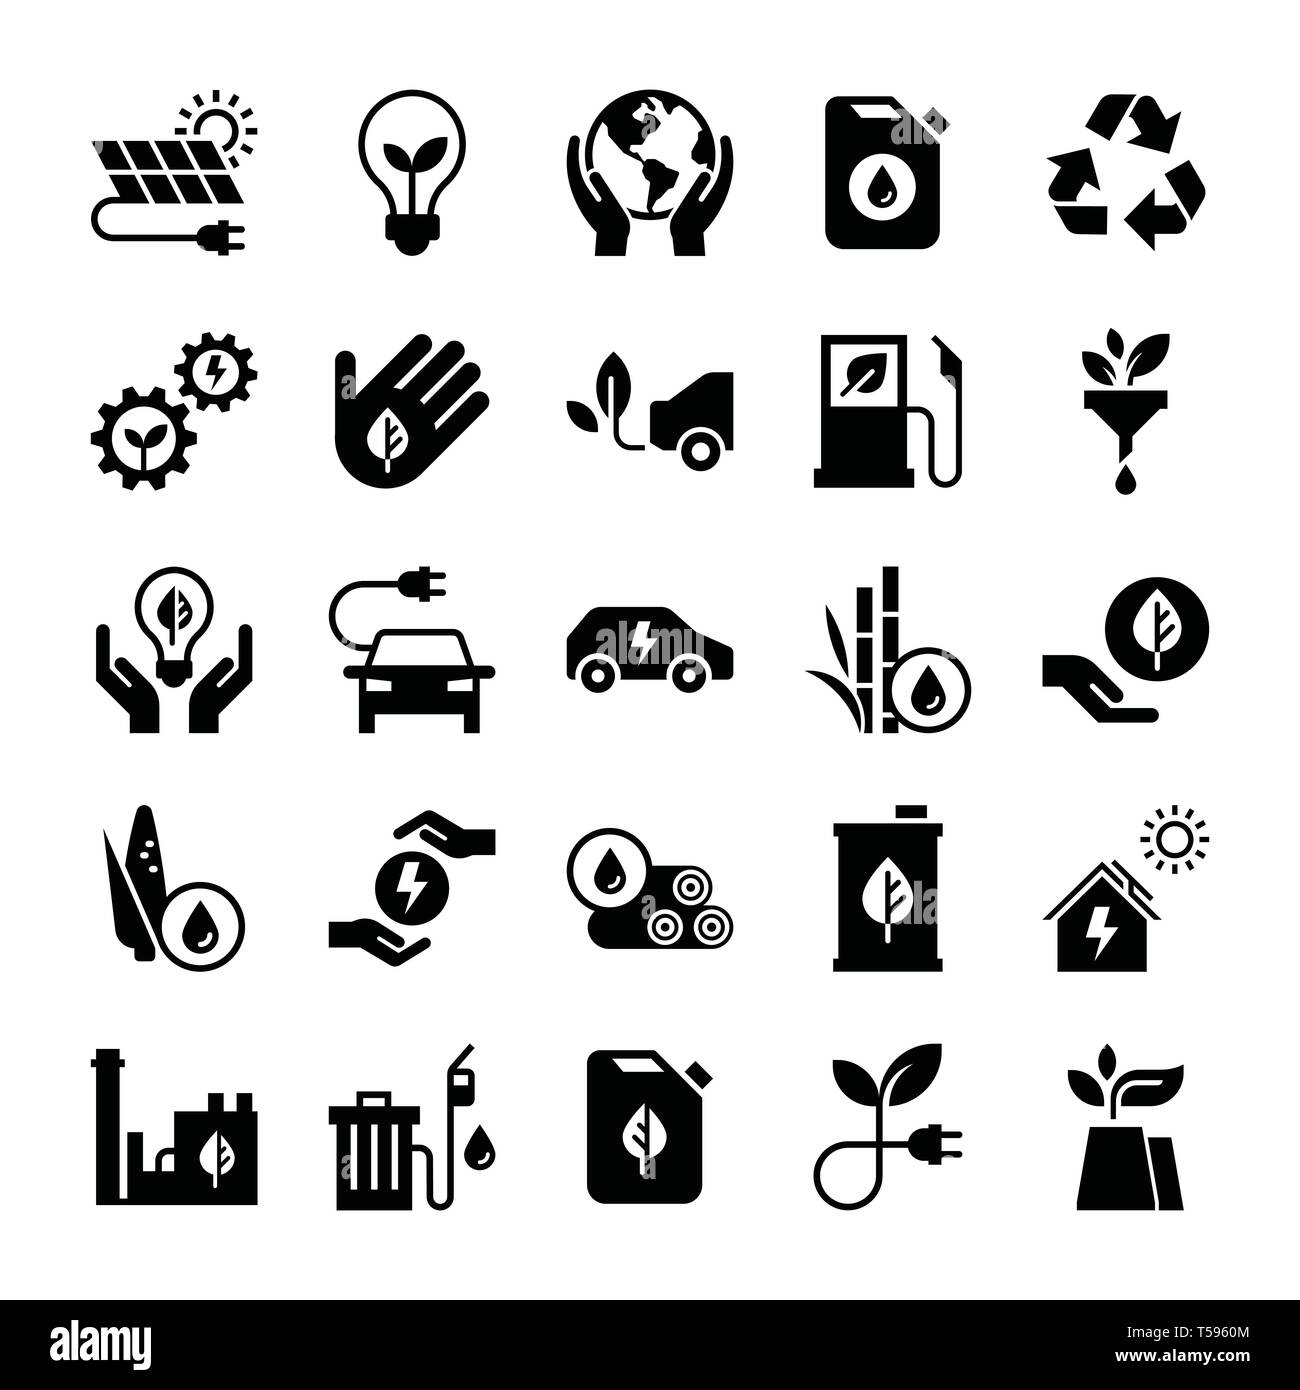 Green energy icon set in flat style. Stock Vector